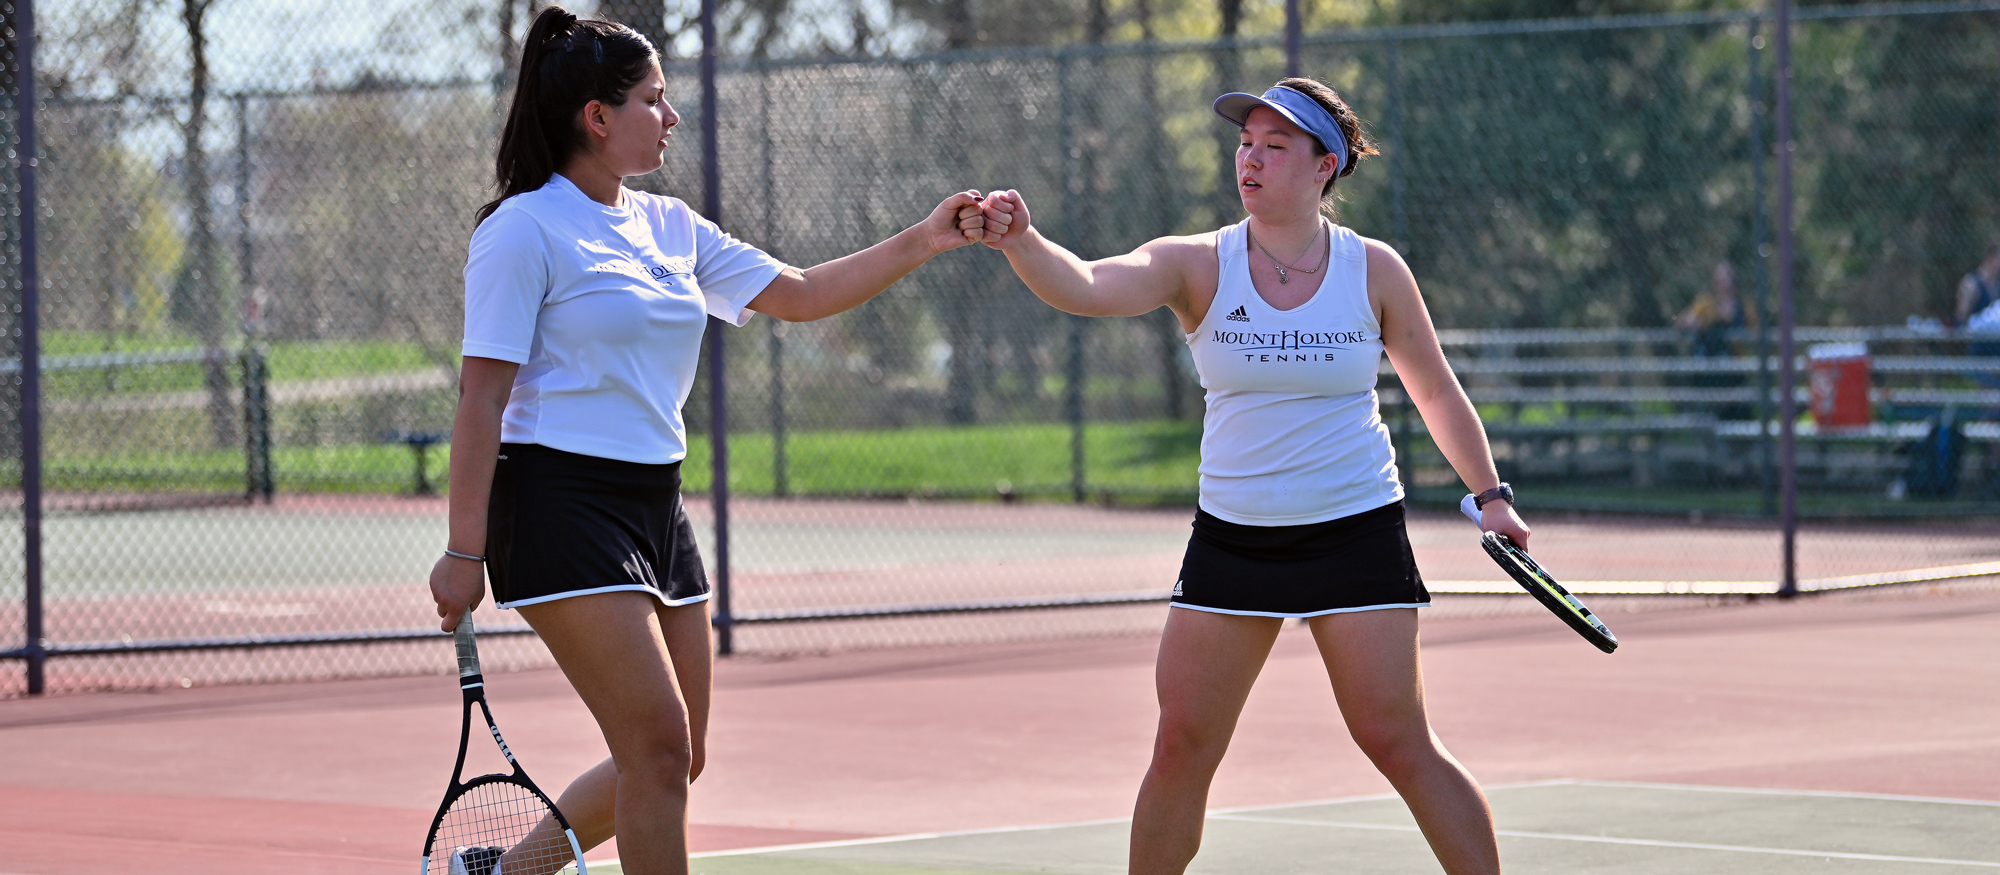 Jaskirat Kaur (left) and Annika Chai (right) were 4-0 as Mount Holyoke's No. 1 doubles team as the Lyons played in the International Tennis Hall of Fame Classic on Sept. 14, 2023 in Newport, R.I. (RJB Sports file photo)